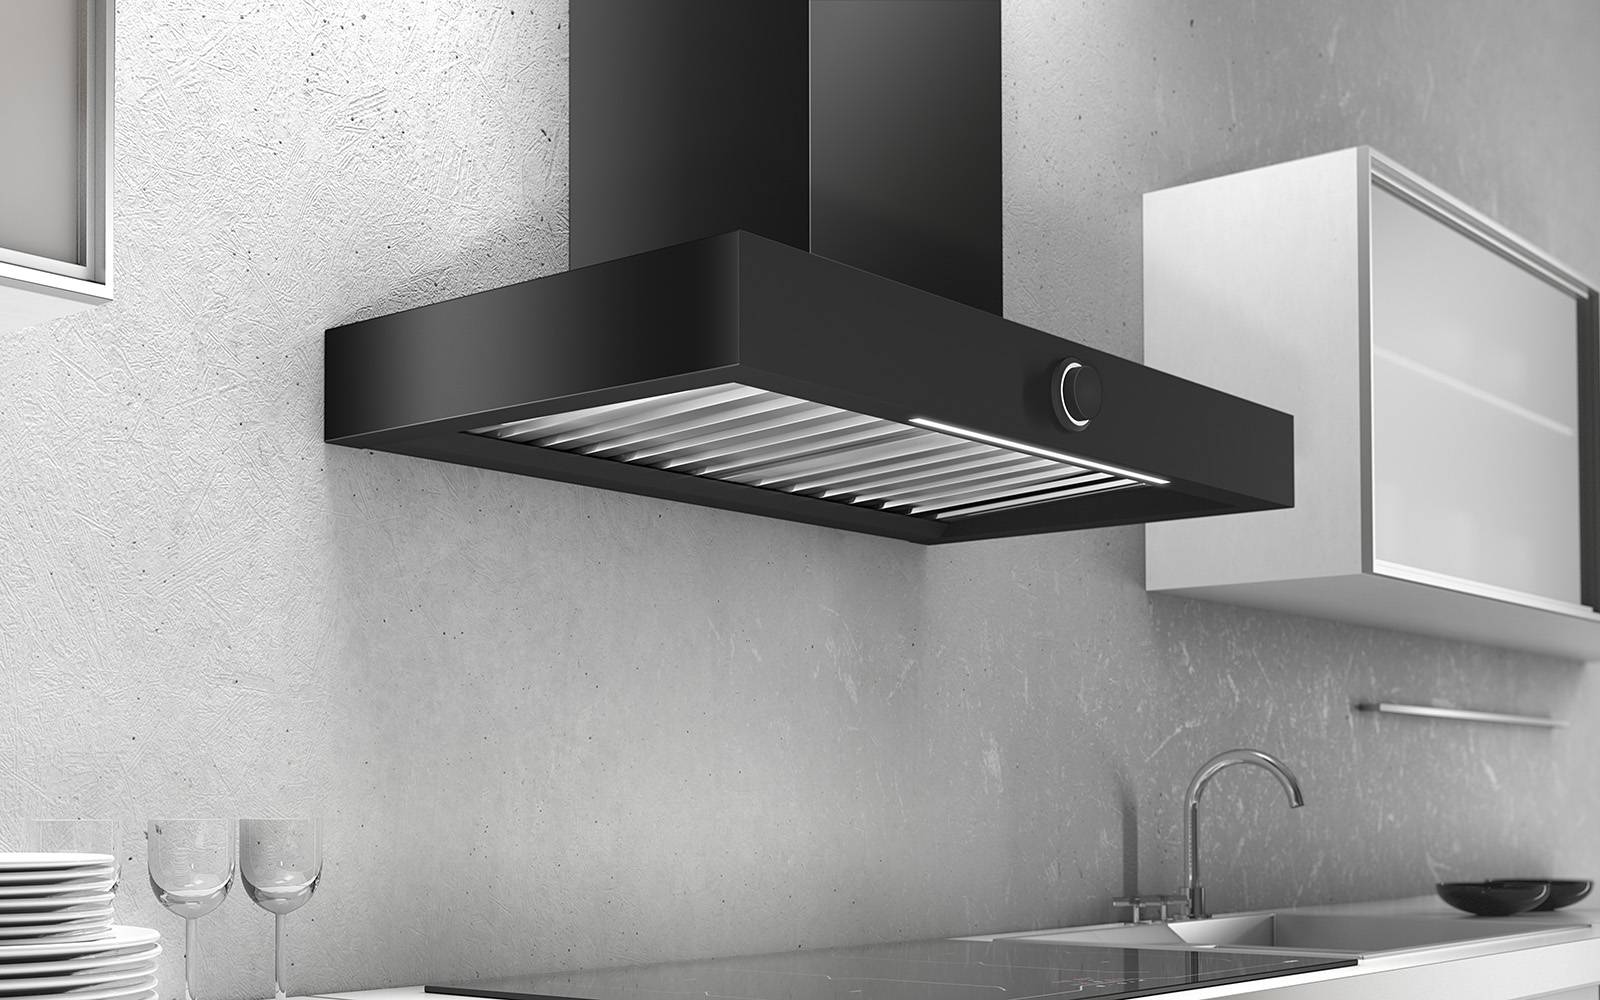 Airforce Vis Boxy 90cm Wall Mounted Cooker Hood in Anthracite with Electronic rotary Control